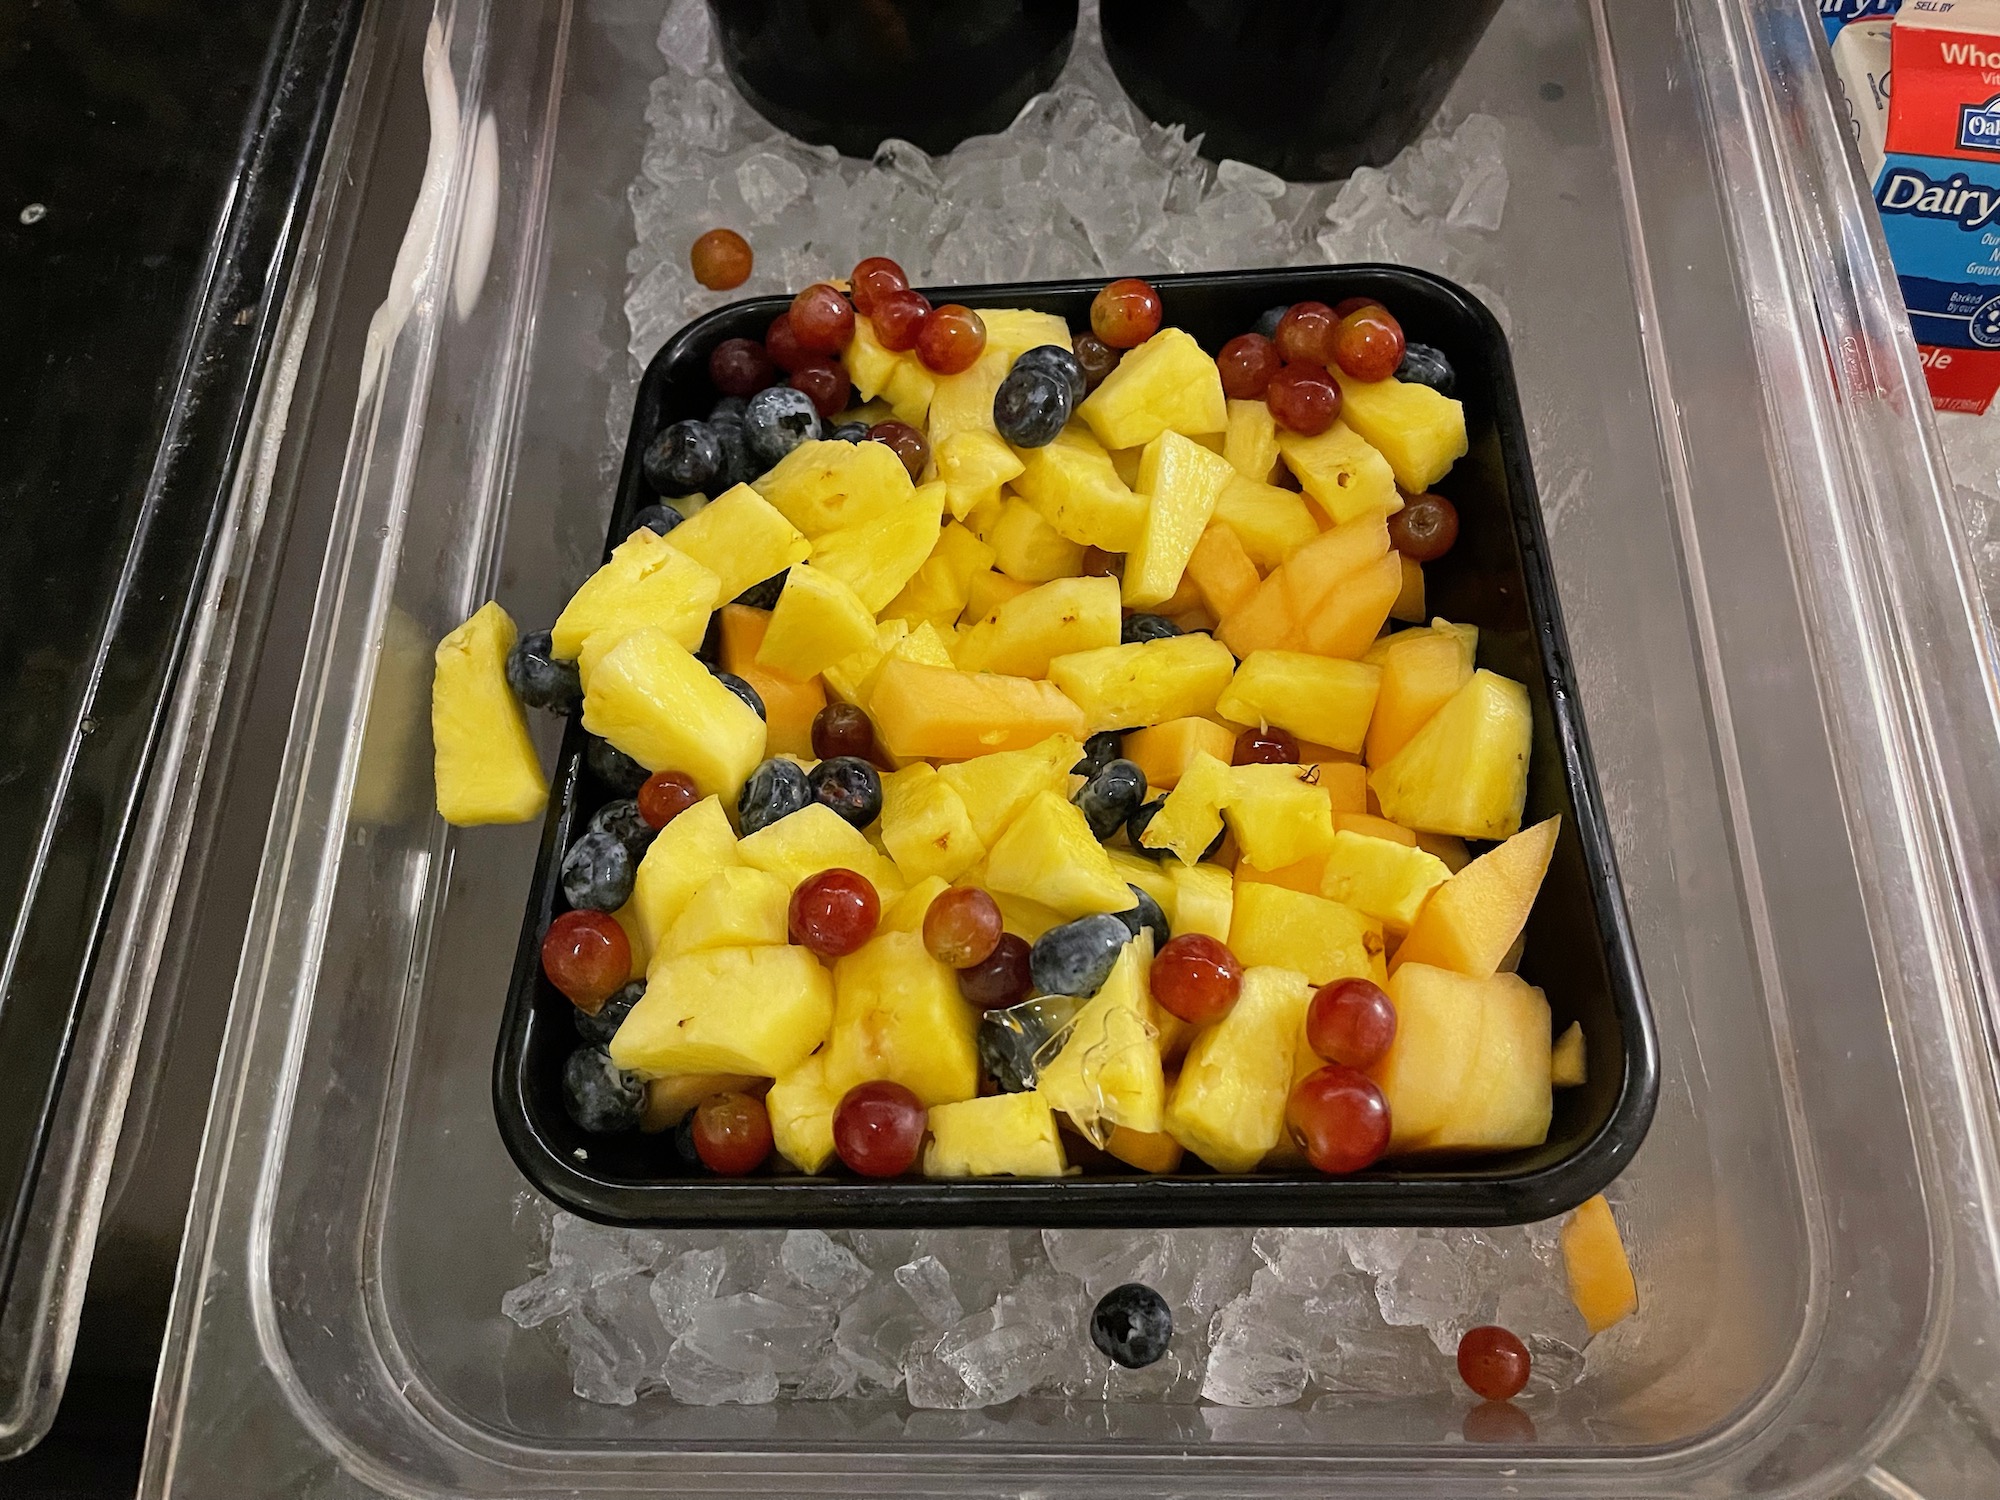 a bowl of fruit on ice